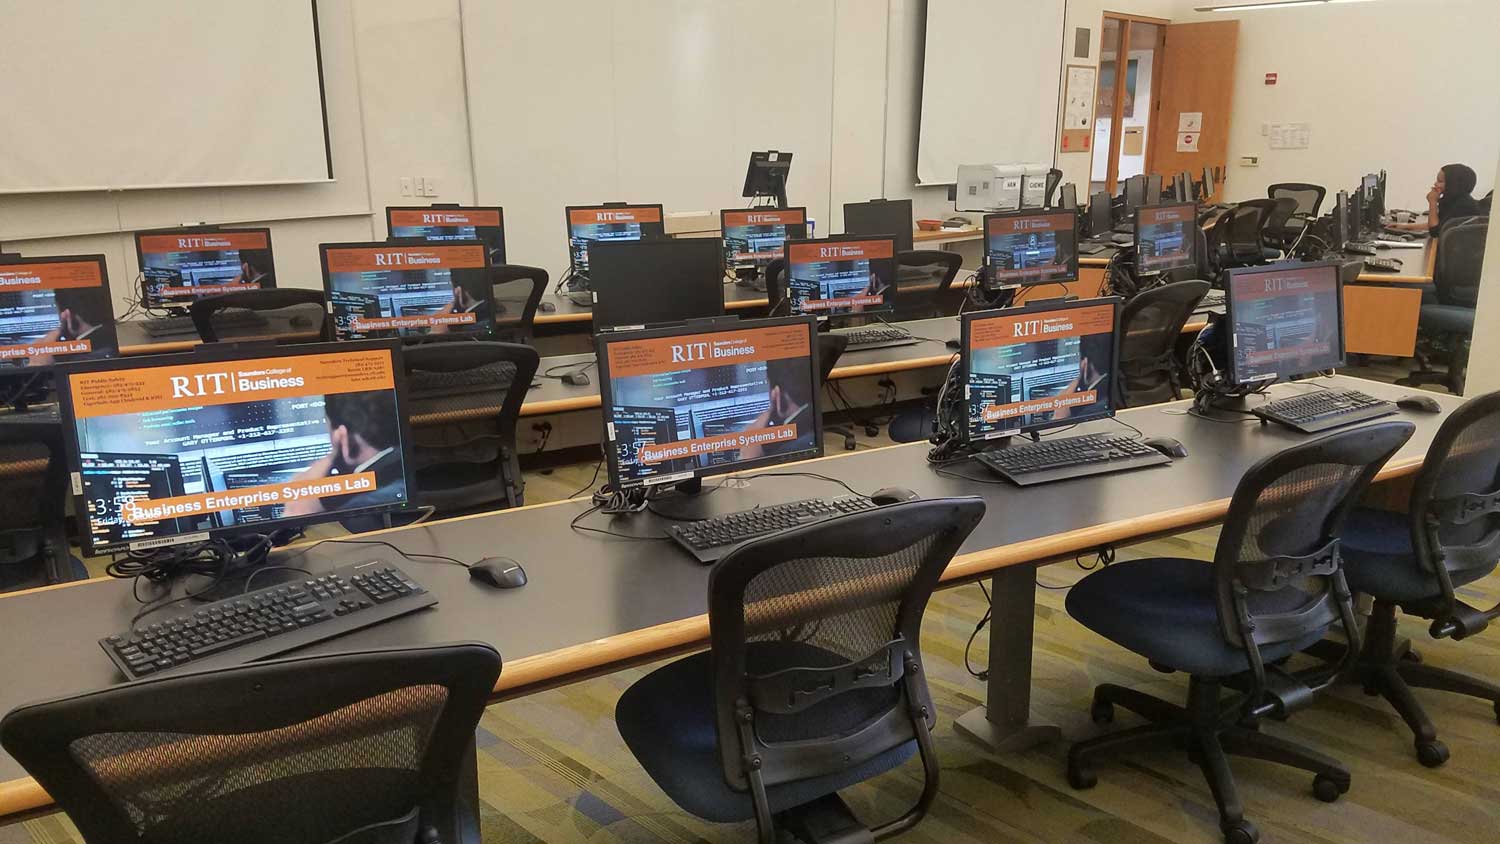 Computer lab with RIT screen savers